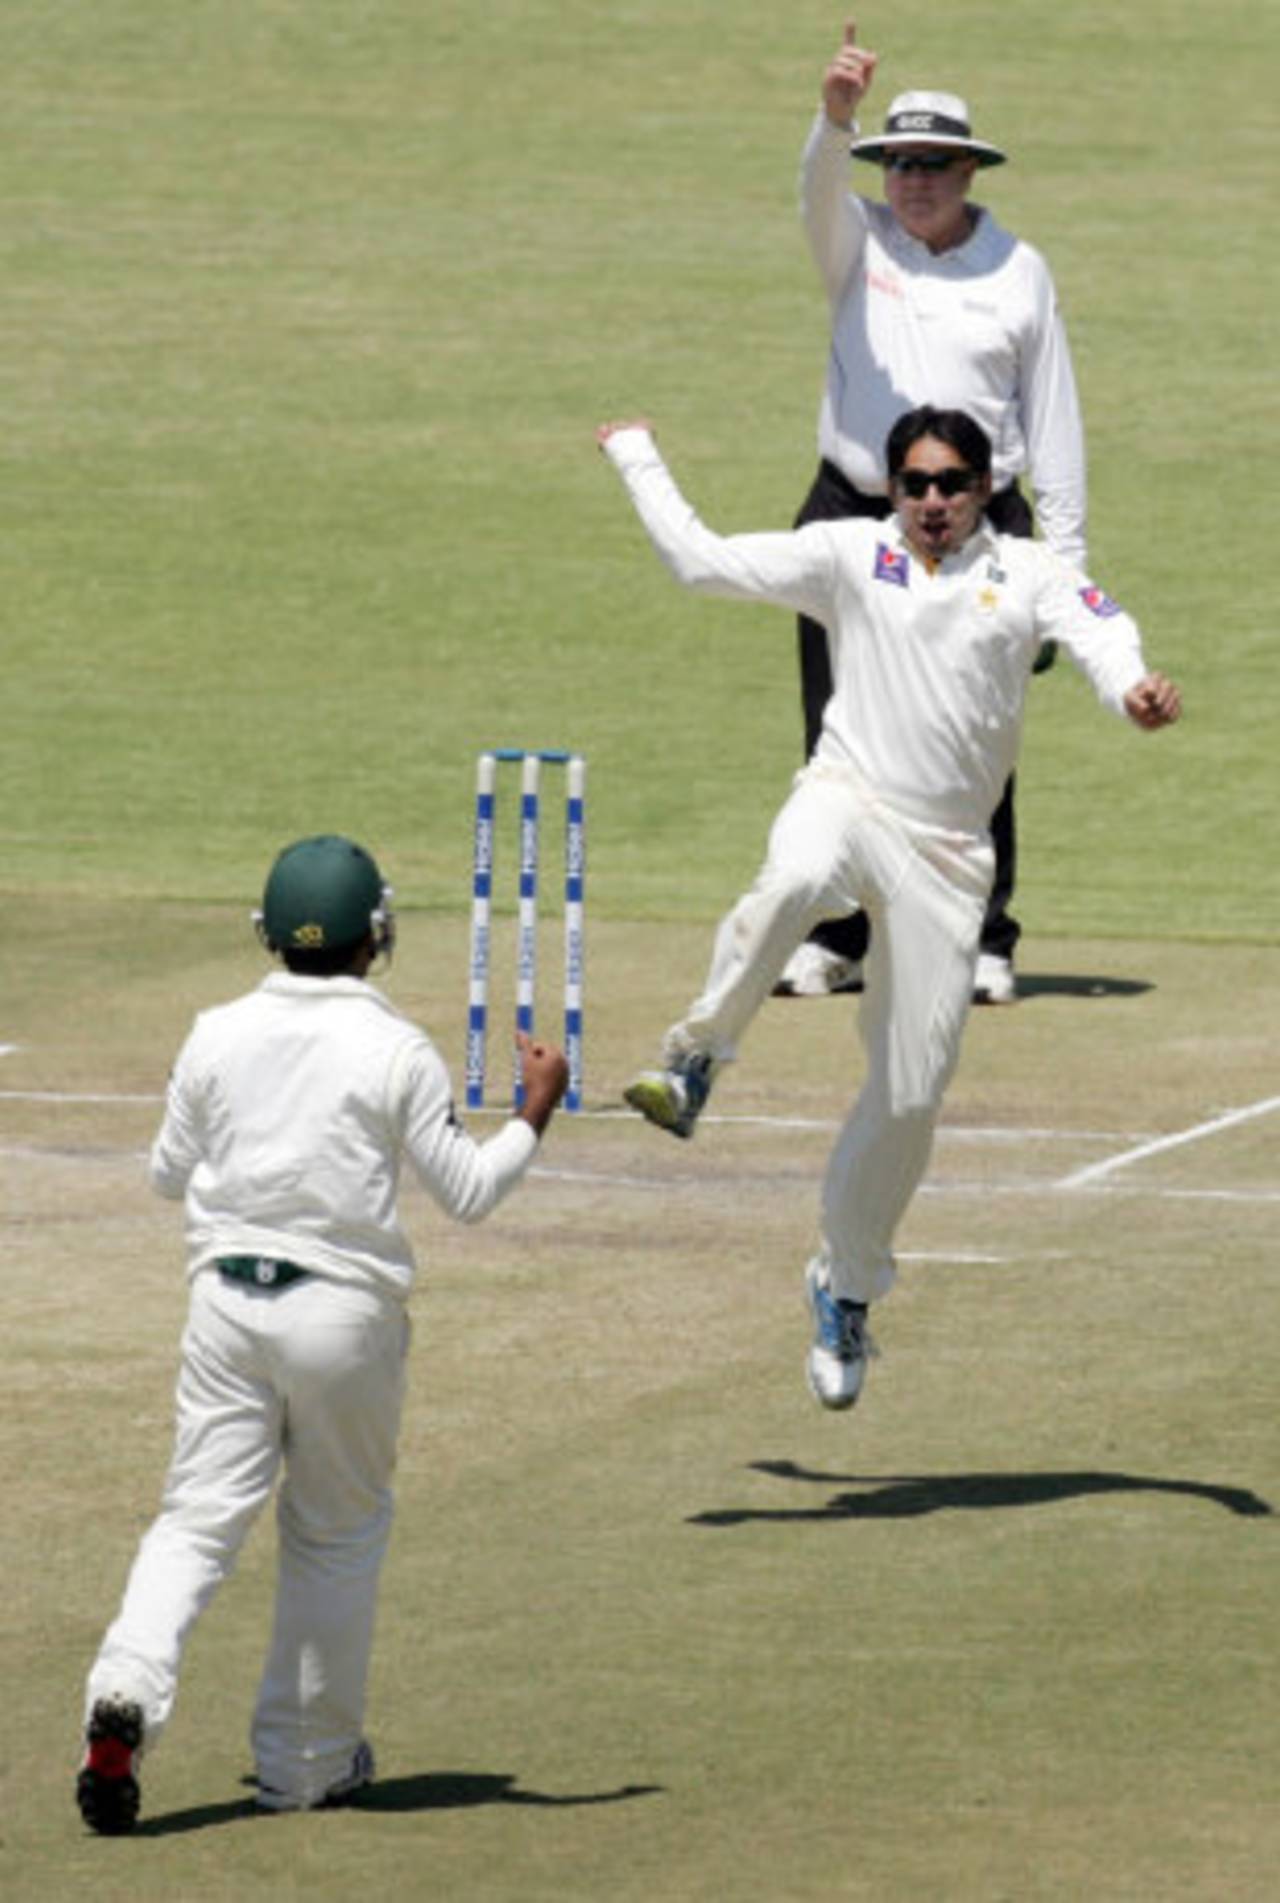 Hamilton Masakadza expects spin to play a bigger role in the second Test. Saeed Ajmal took 11 wickets in the first&nbsp;&nbsp;&bull;&nbsp;&nbsp;AFP